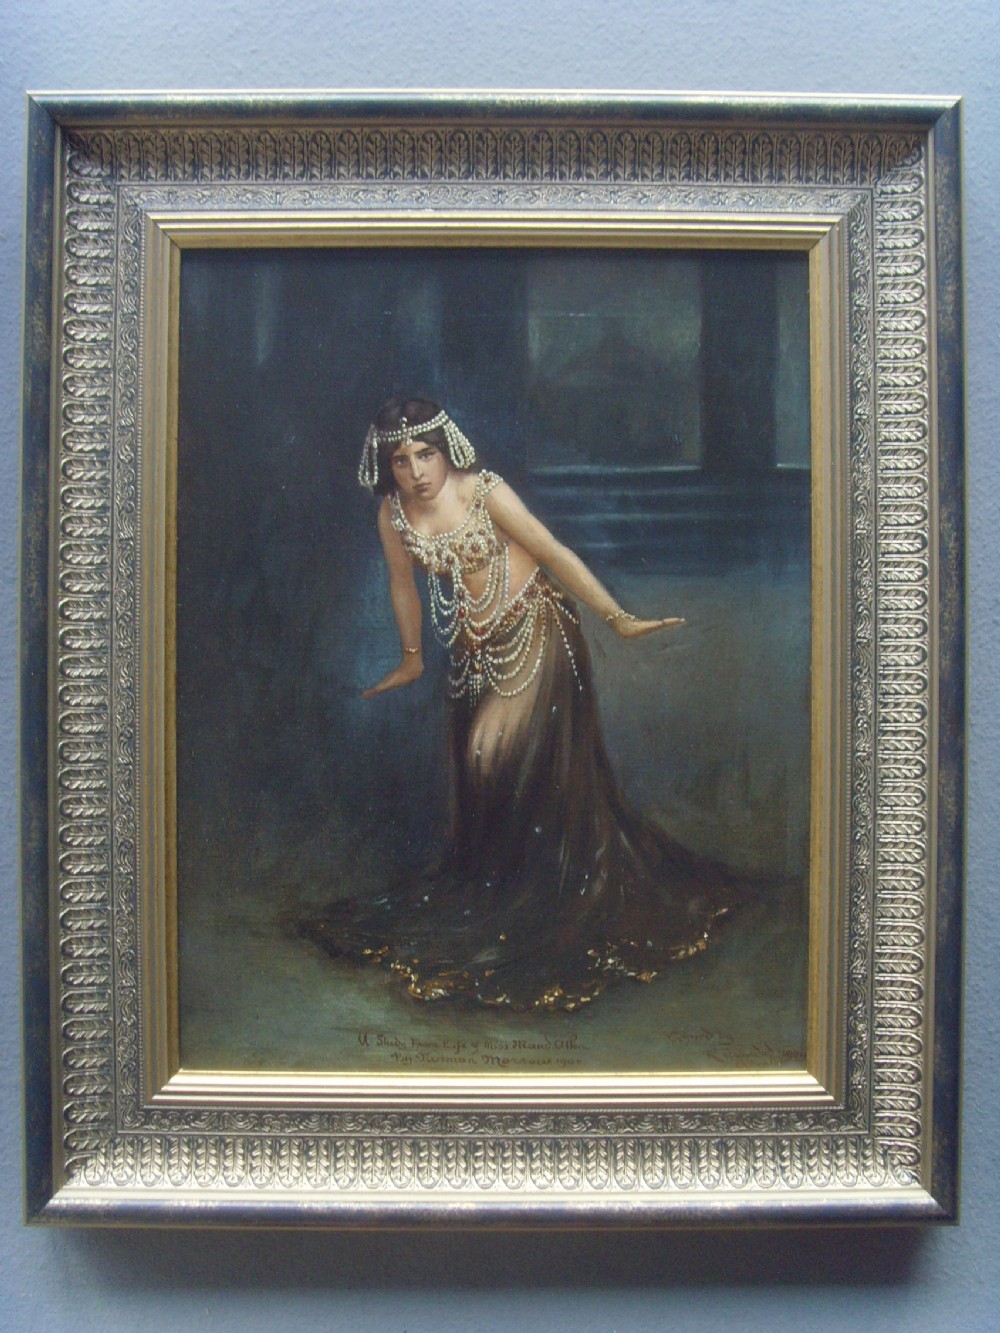 quality oil painting on canvas of dancer maud allan as she portrays salome by gibraltarian artist rtrinidad signed dated c1909 24 x 20 inches approx